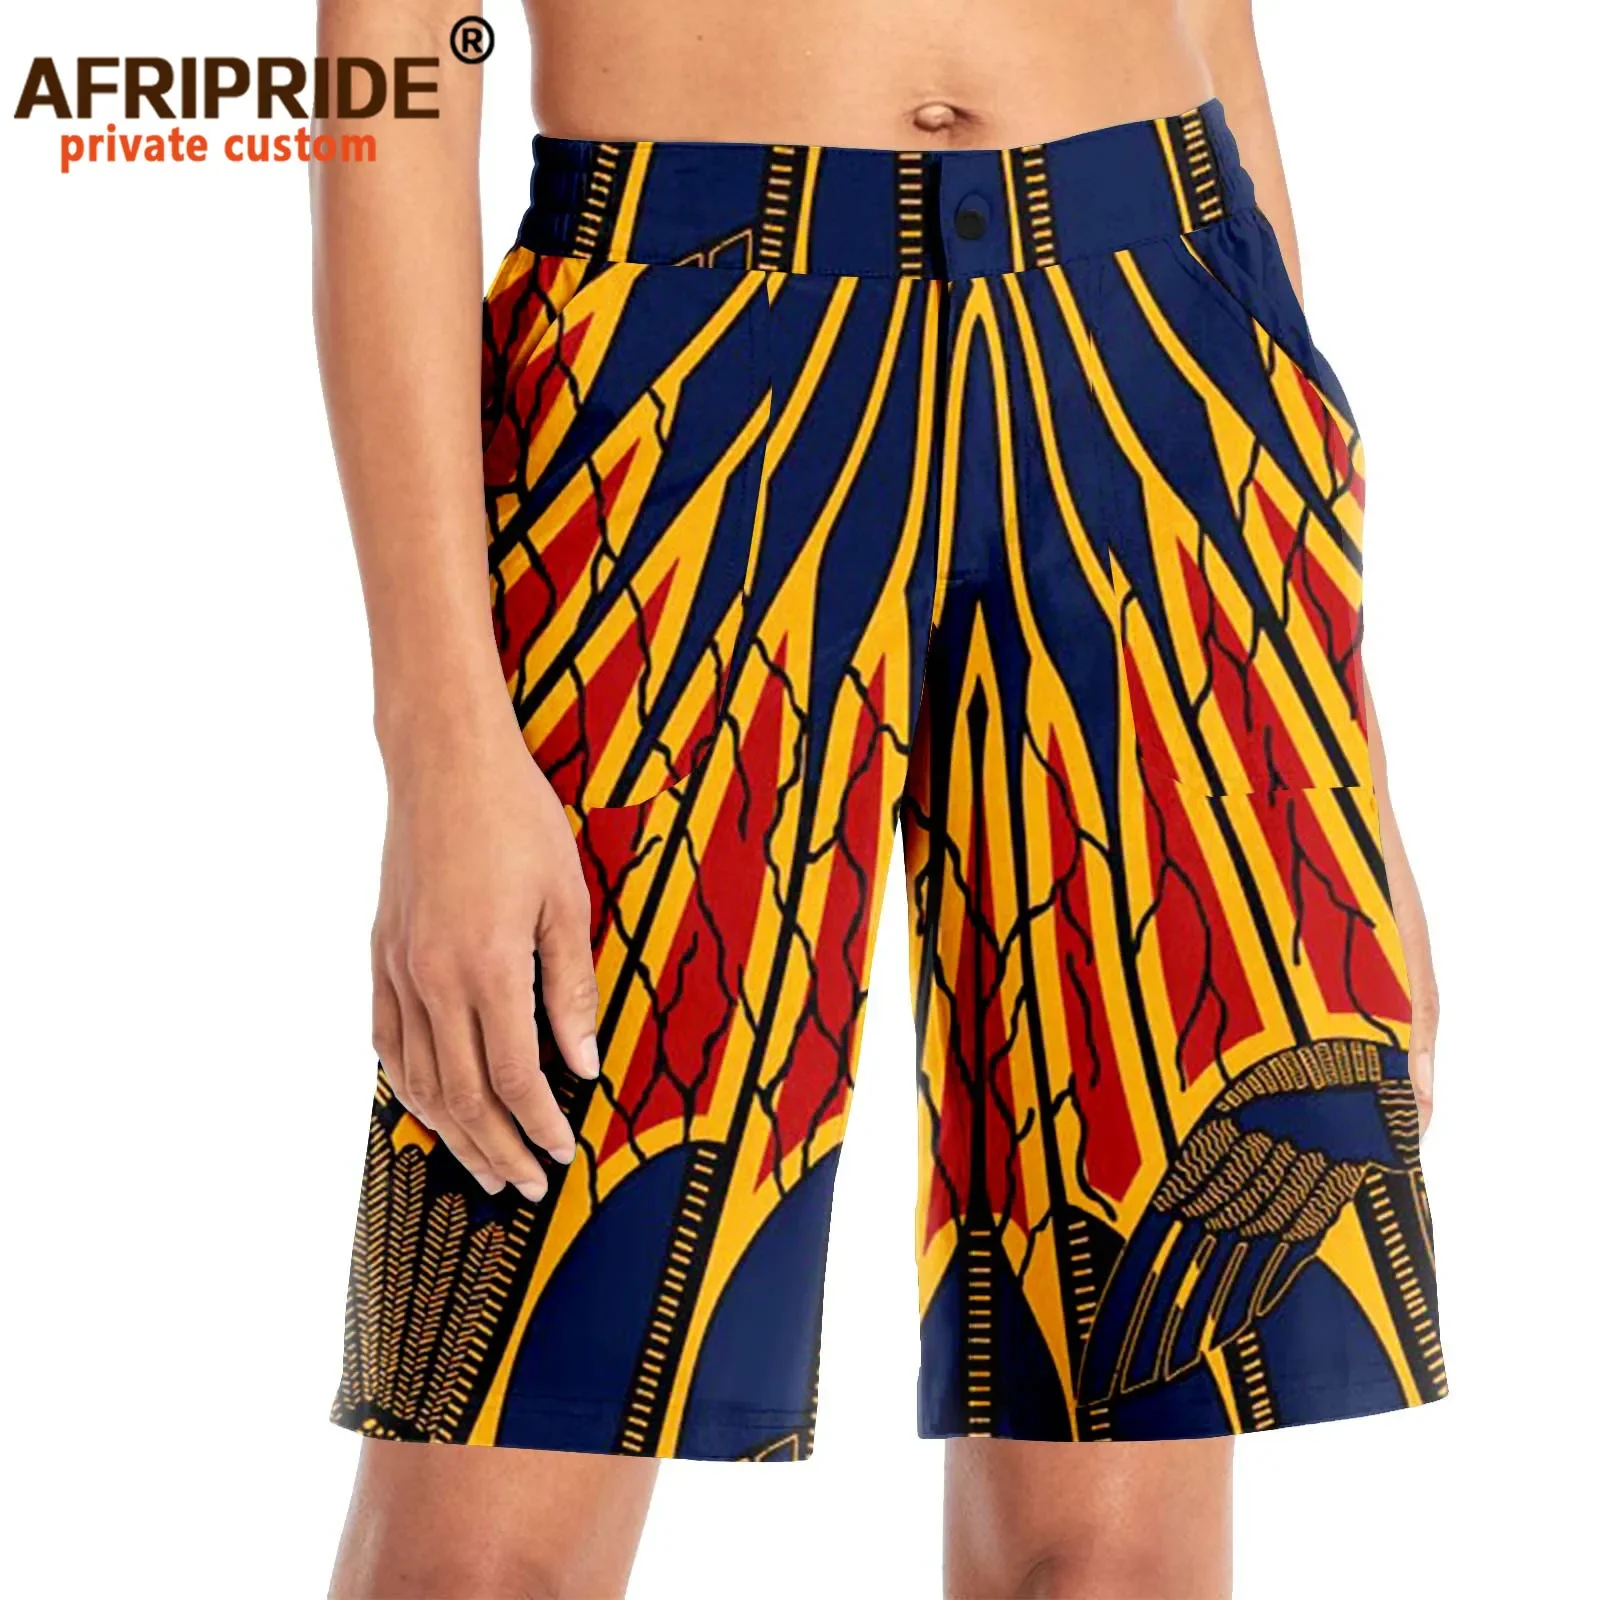 African Shorts for Women Summer Fashion Casual Sexy Print Short Cotton Plus Size Casual High Waist with Two Pockets A2121002 african men suits dashiki shirts tops pants with pockets 2 piece set ankara patchwork outfit blouse plus size clothing a2116053